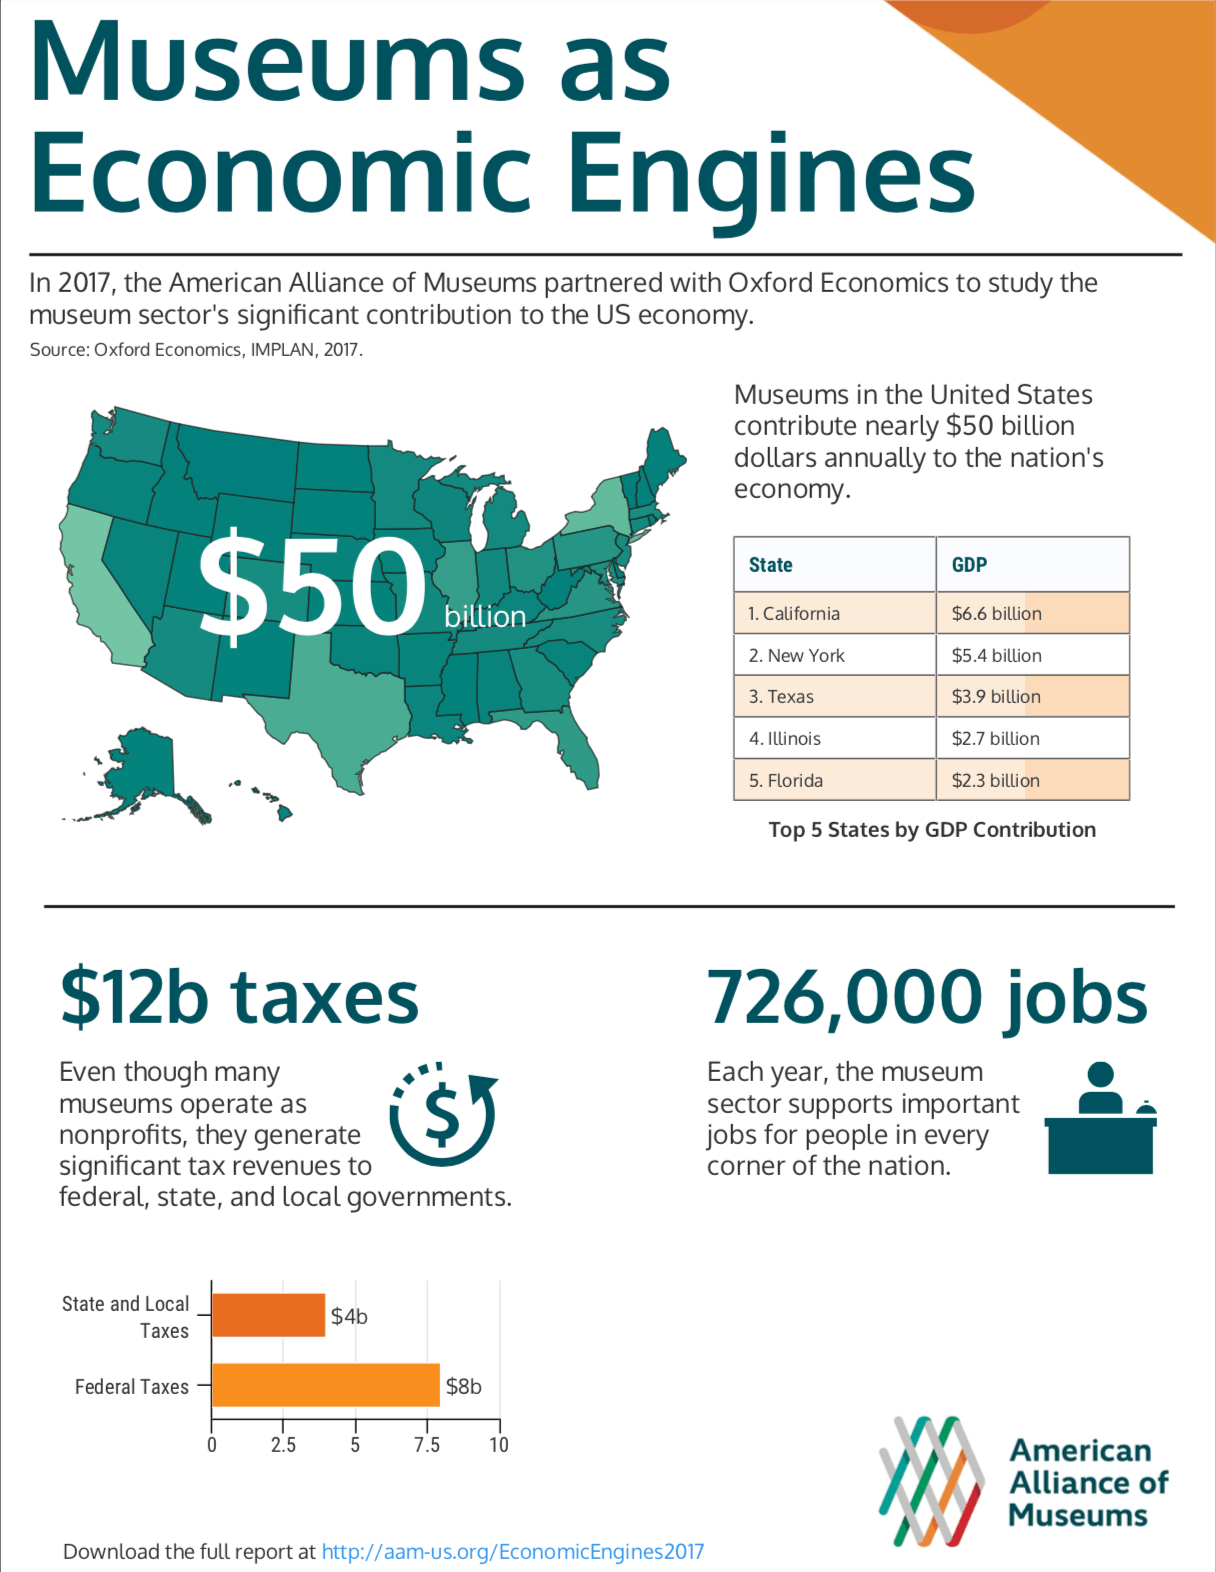 An Infographic showing the national results of the Economic Engines Museum Survey